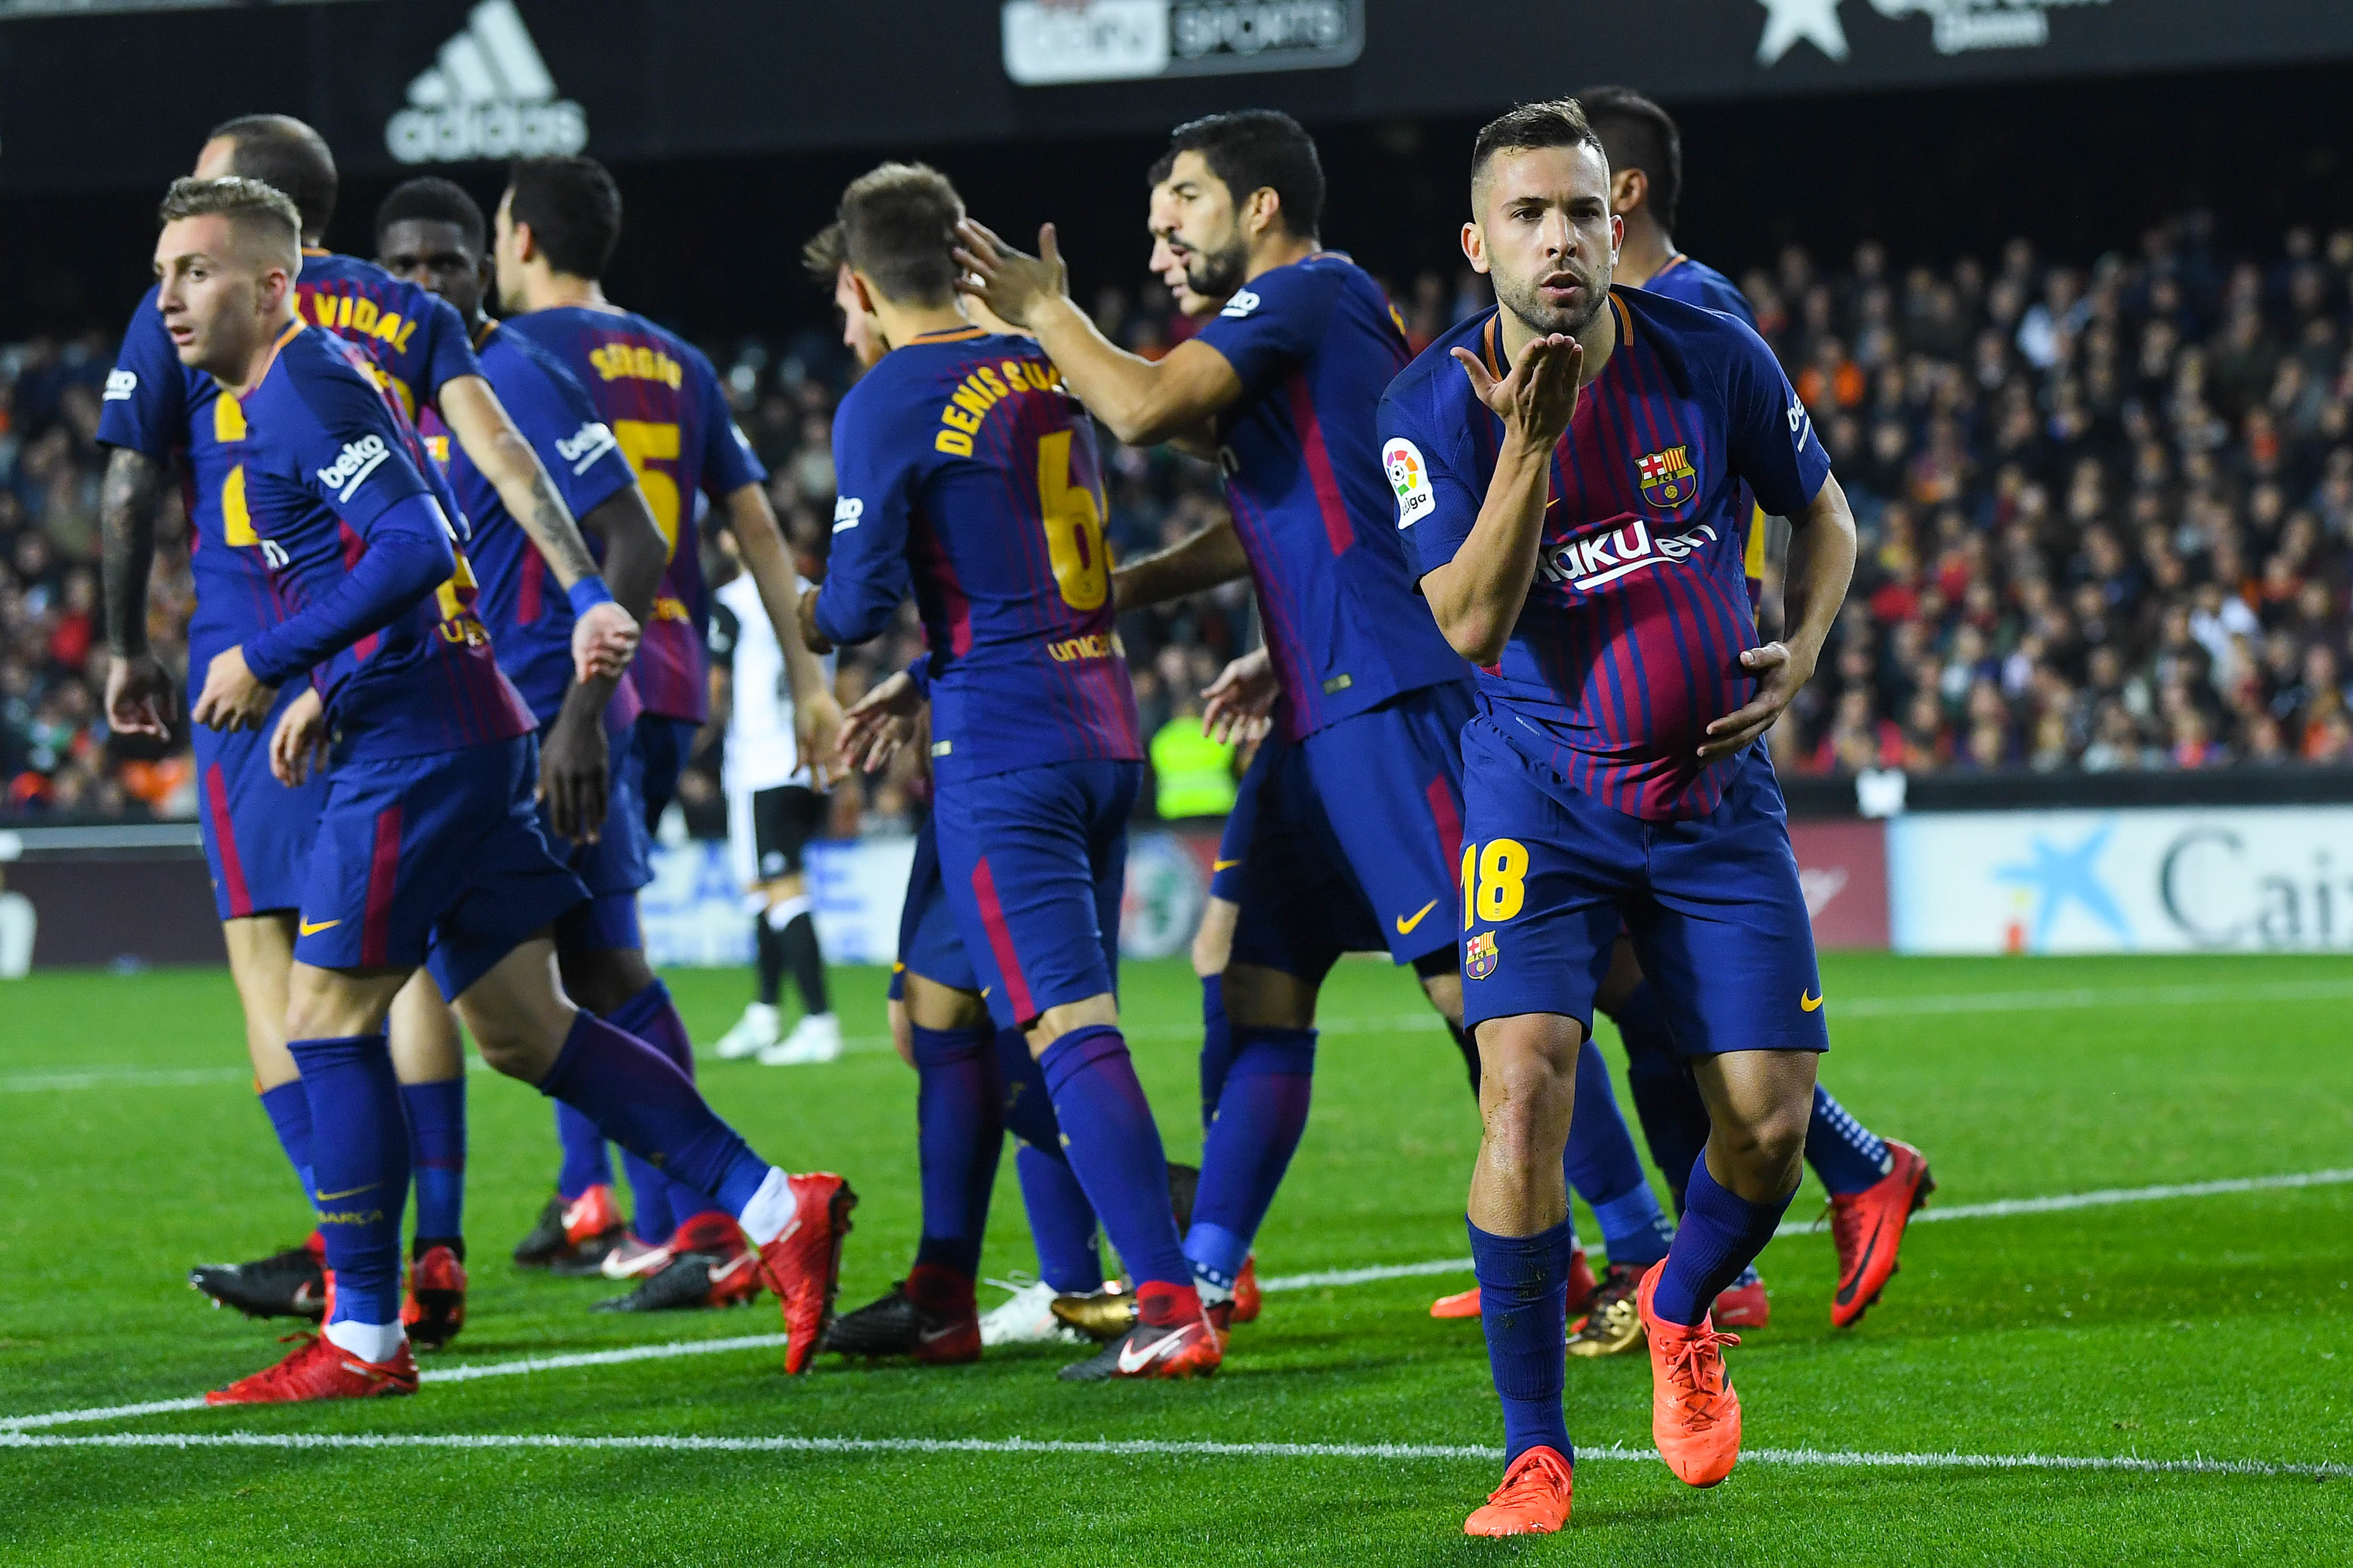 VALENCIA, SPAIN - NOVEMBER 26:  Jordi Alba of FC Barcelona celebrates after scoring his team's first goal during the La Liga match between Valencia and Barcelona at Mestalla stadium on November 26, 2017 in Valencia, Spain.  (Photo by David Ramos/Getty Images)